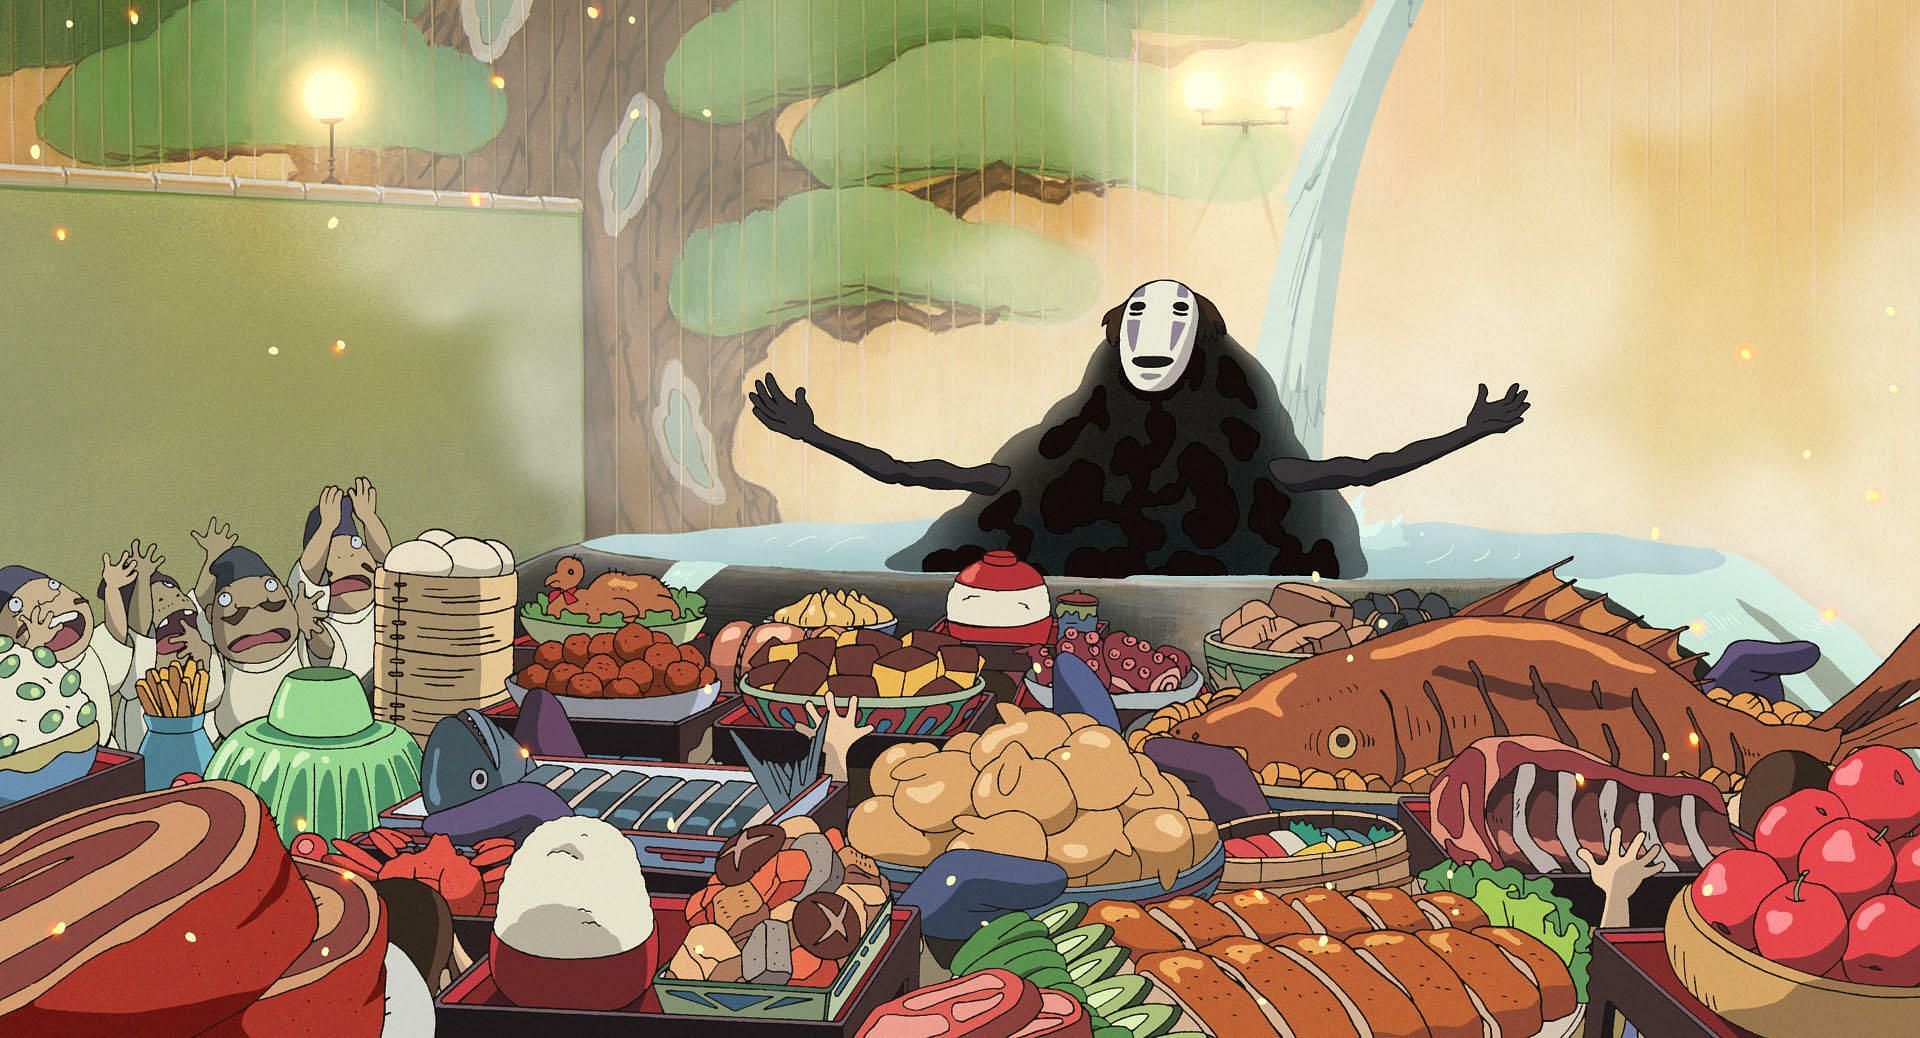 No Face when he slowly turned into a greedy monster (Image via Studio Ghibli)